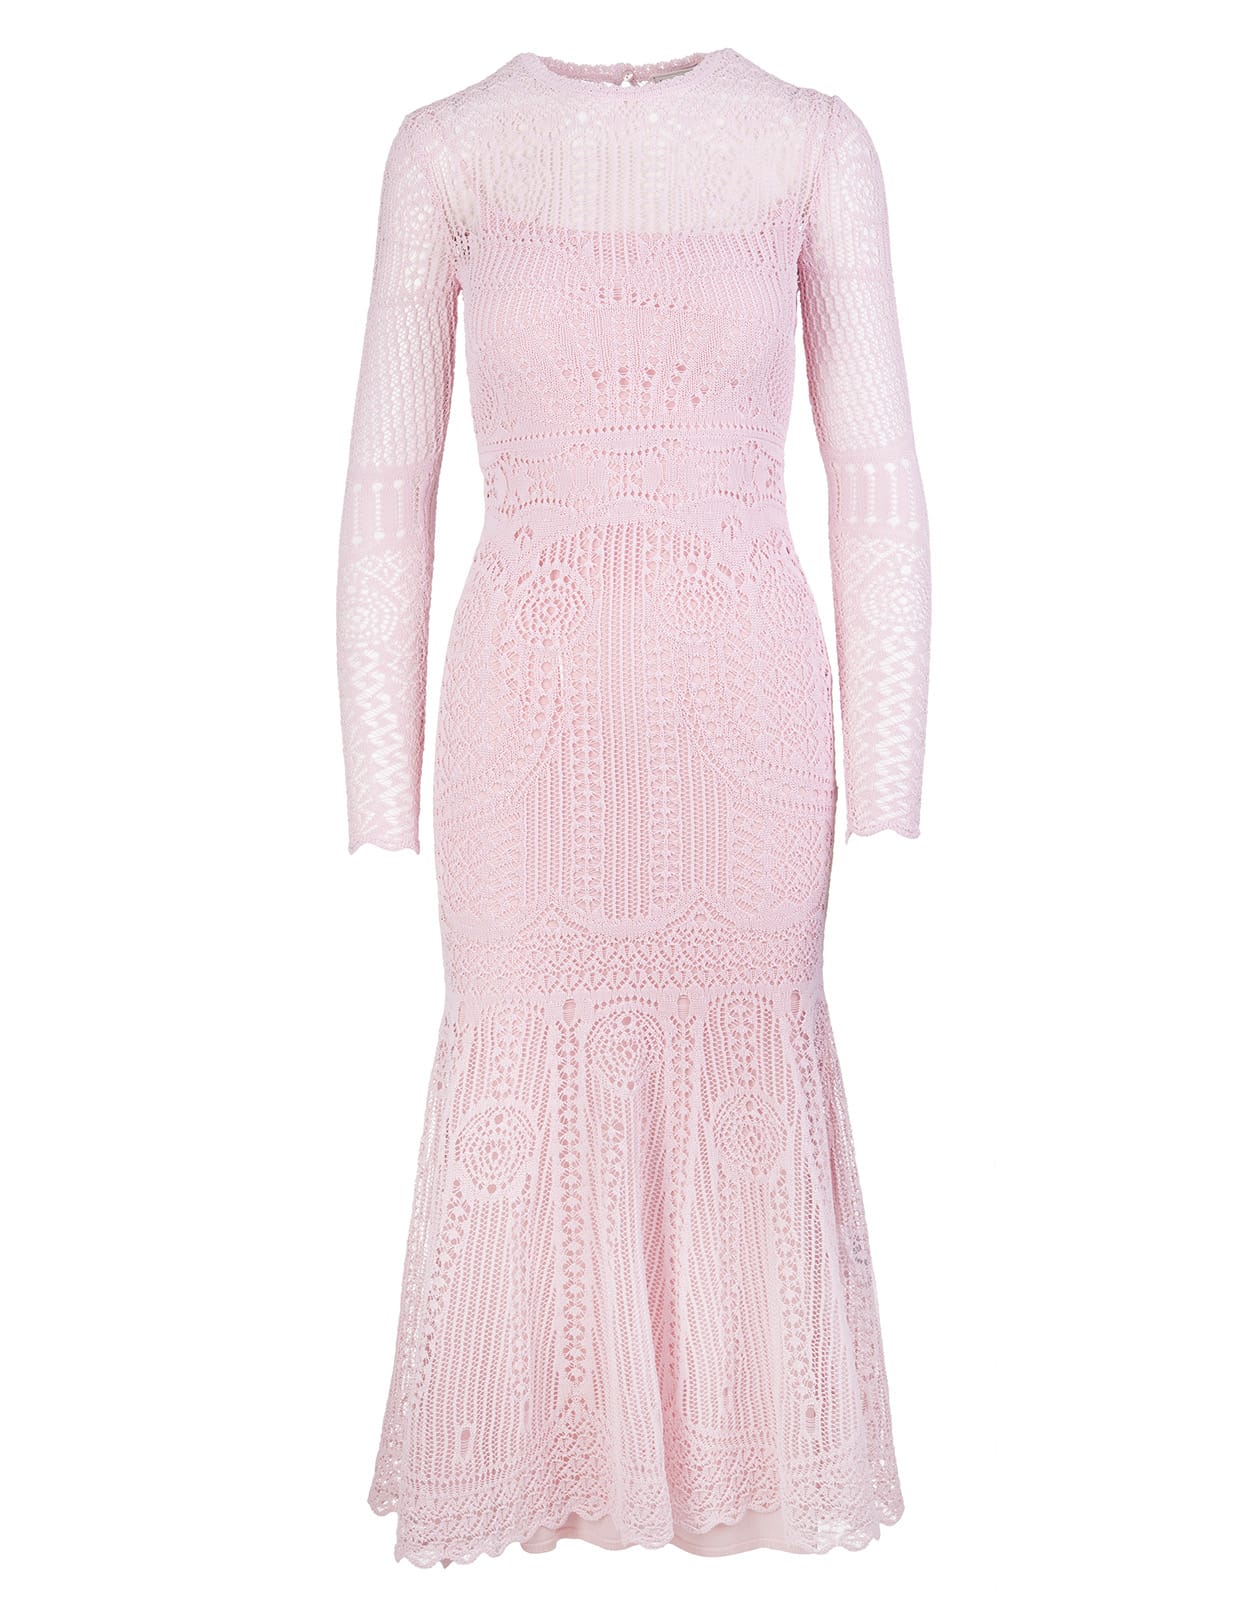 ALEXANDER MCQUEEN PINK KNITTED DRESS WITH LACE PATCHWORK,650280-Q1ASF 5059